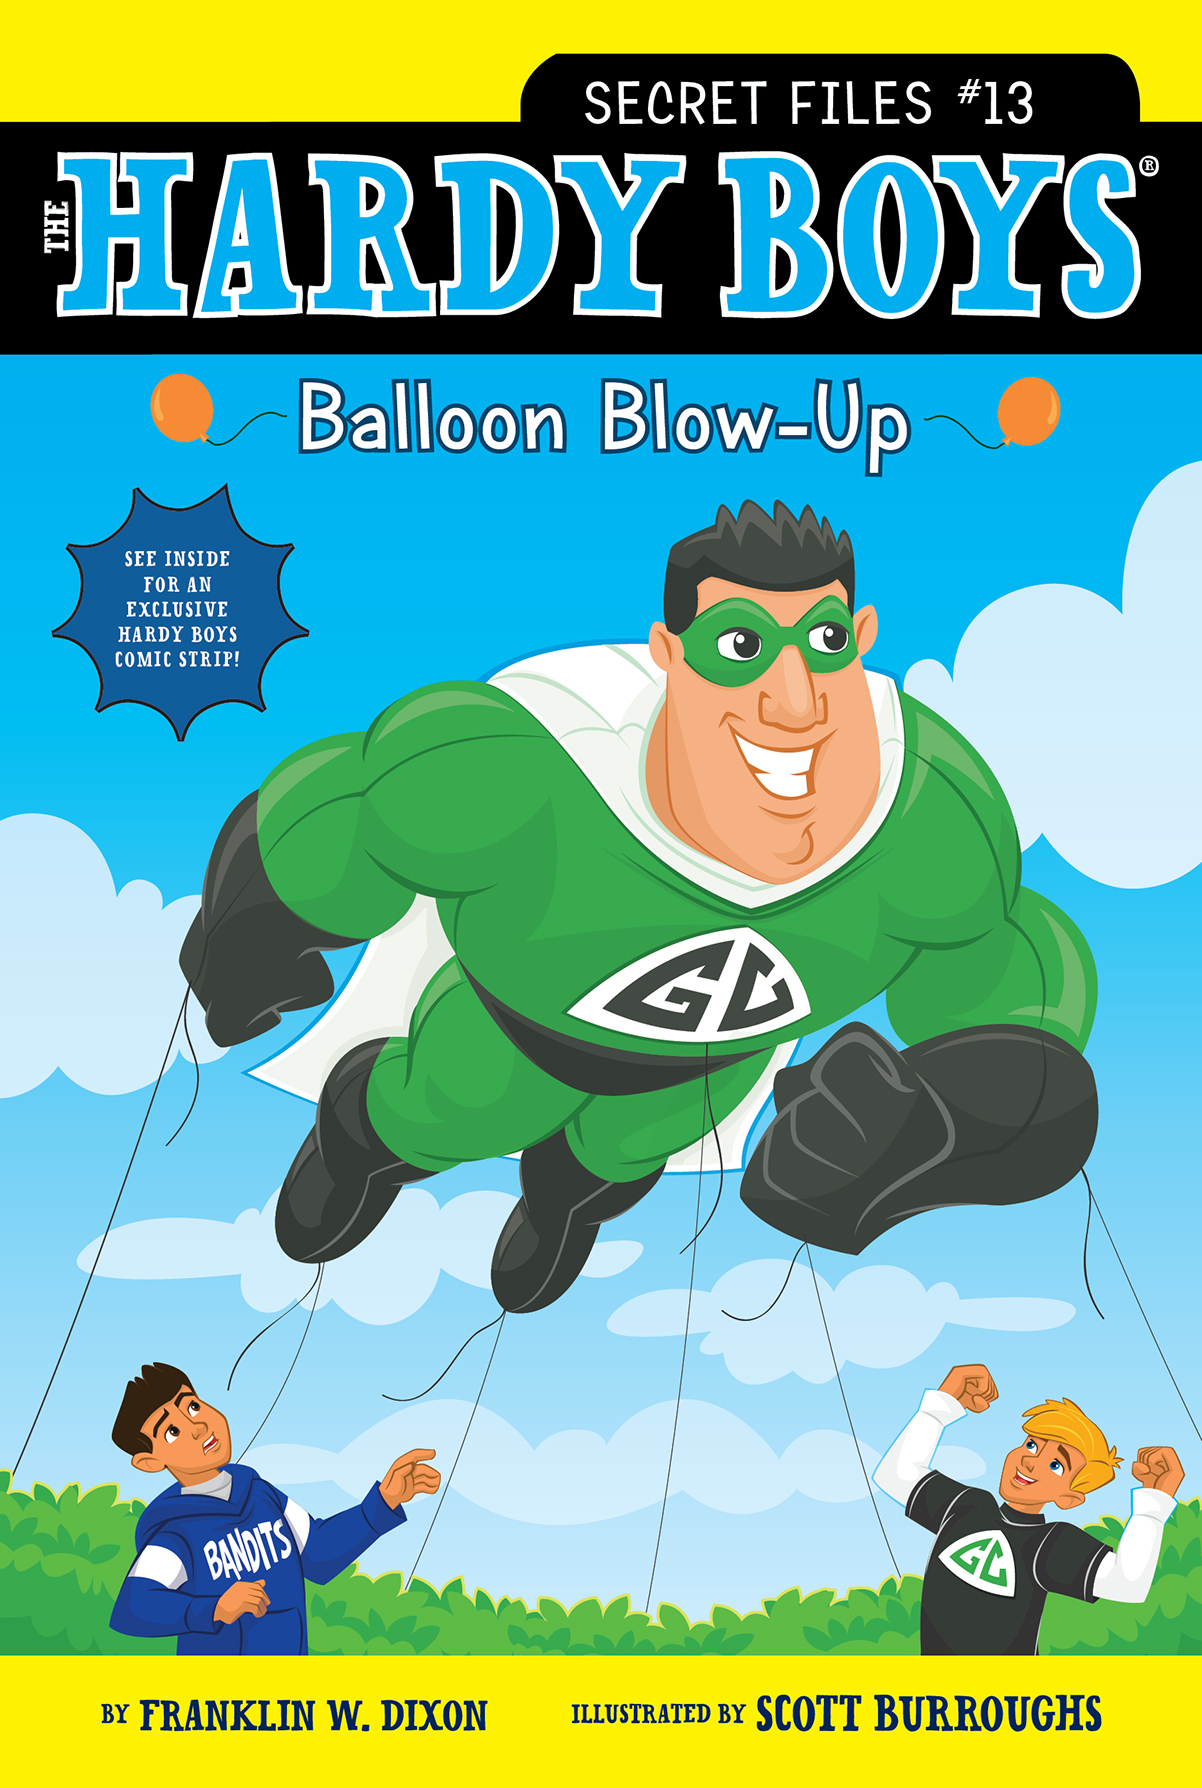 Balloon Blow-Up by Franklin W. Dixon